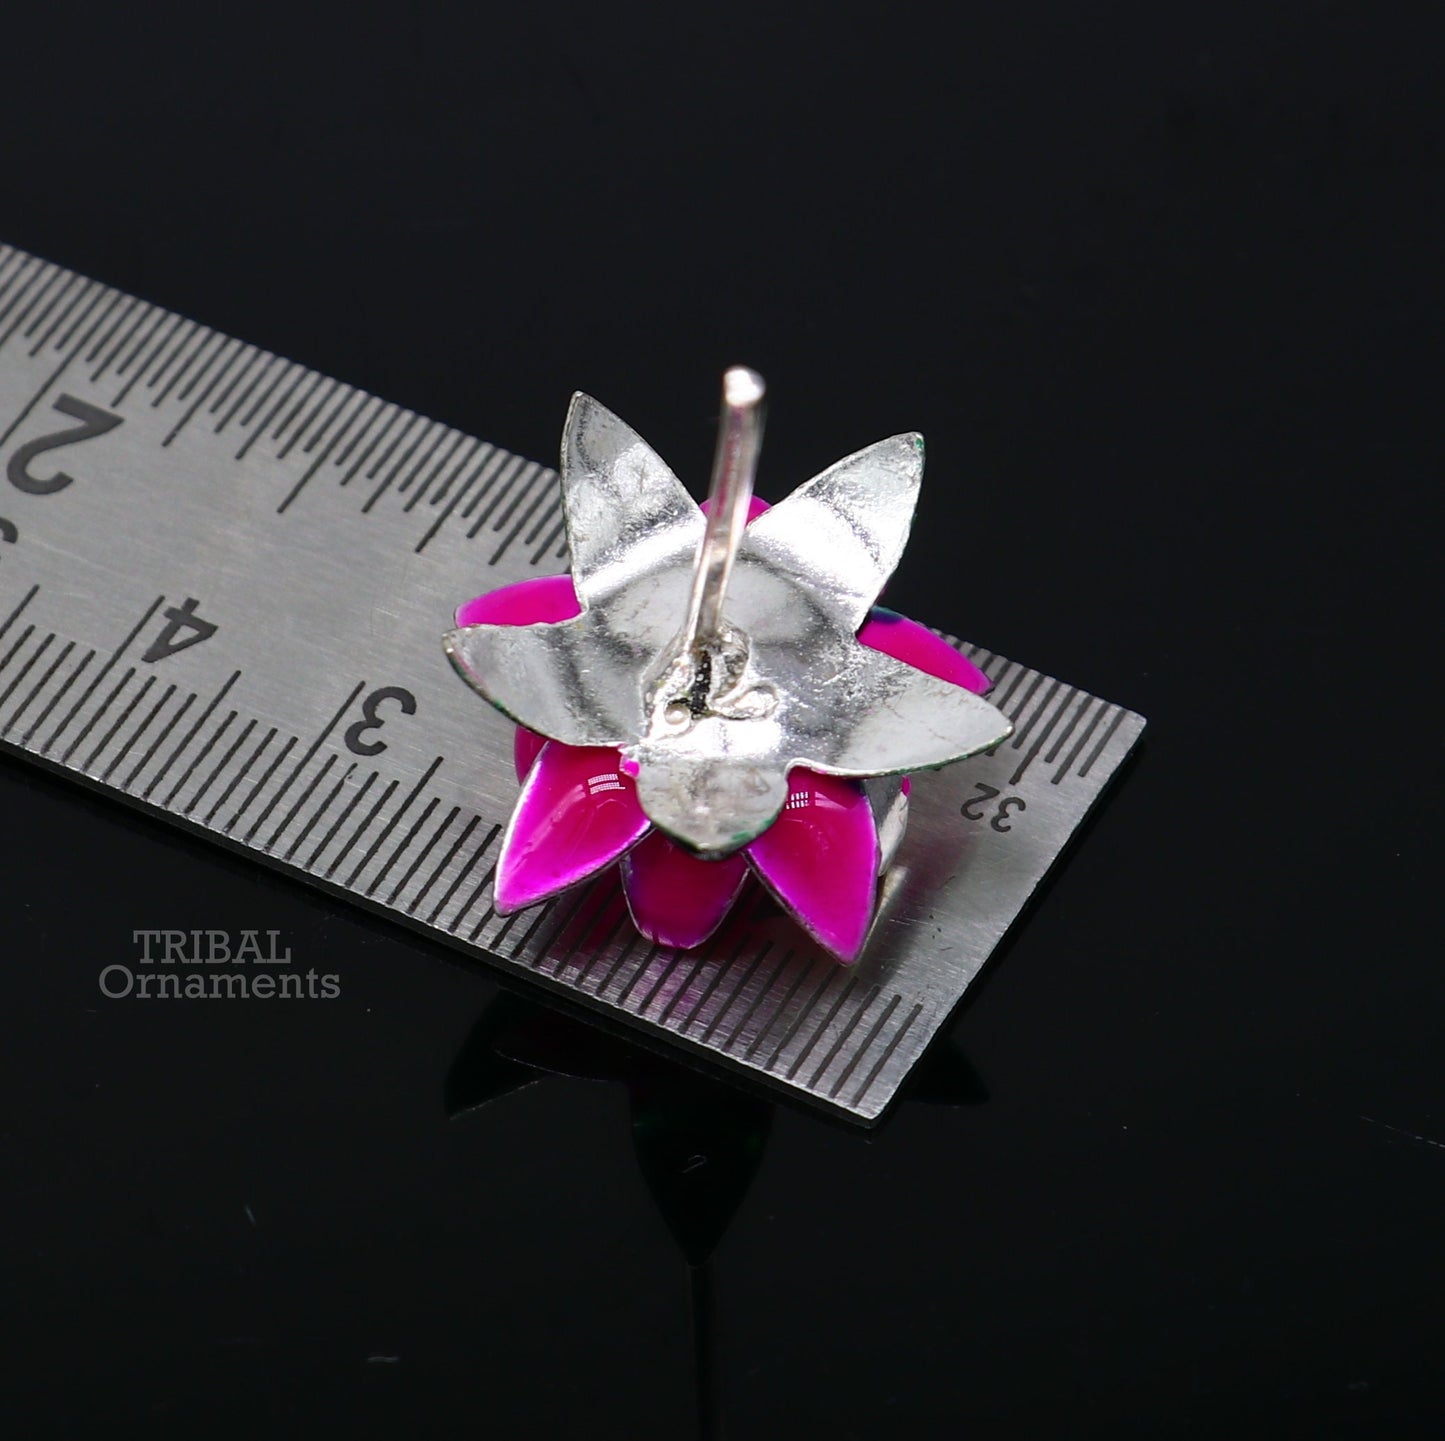 925 sterling silver handmade small lotus flower puja god temple article, excellent customized enamel silver worshipping articles su0744 - TRIBAL ORNAMENTS